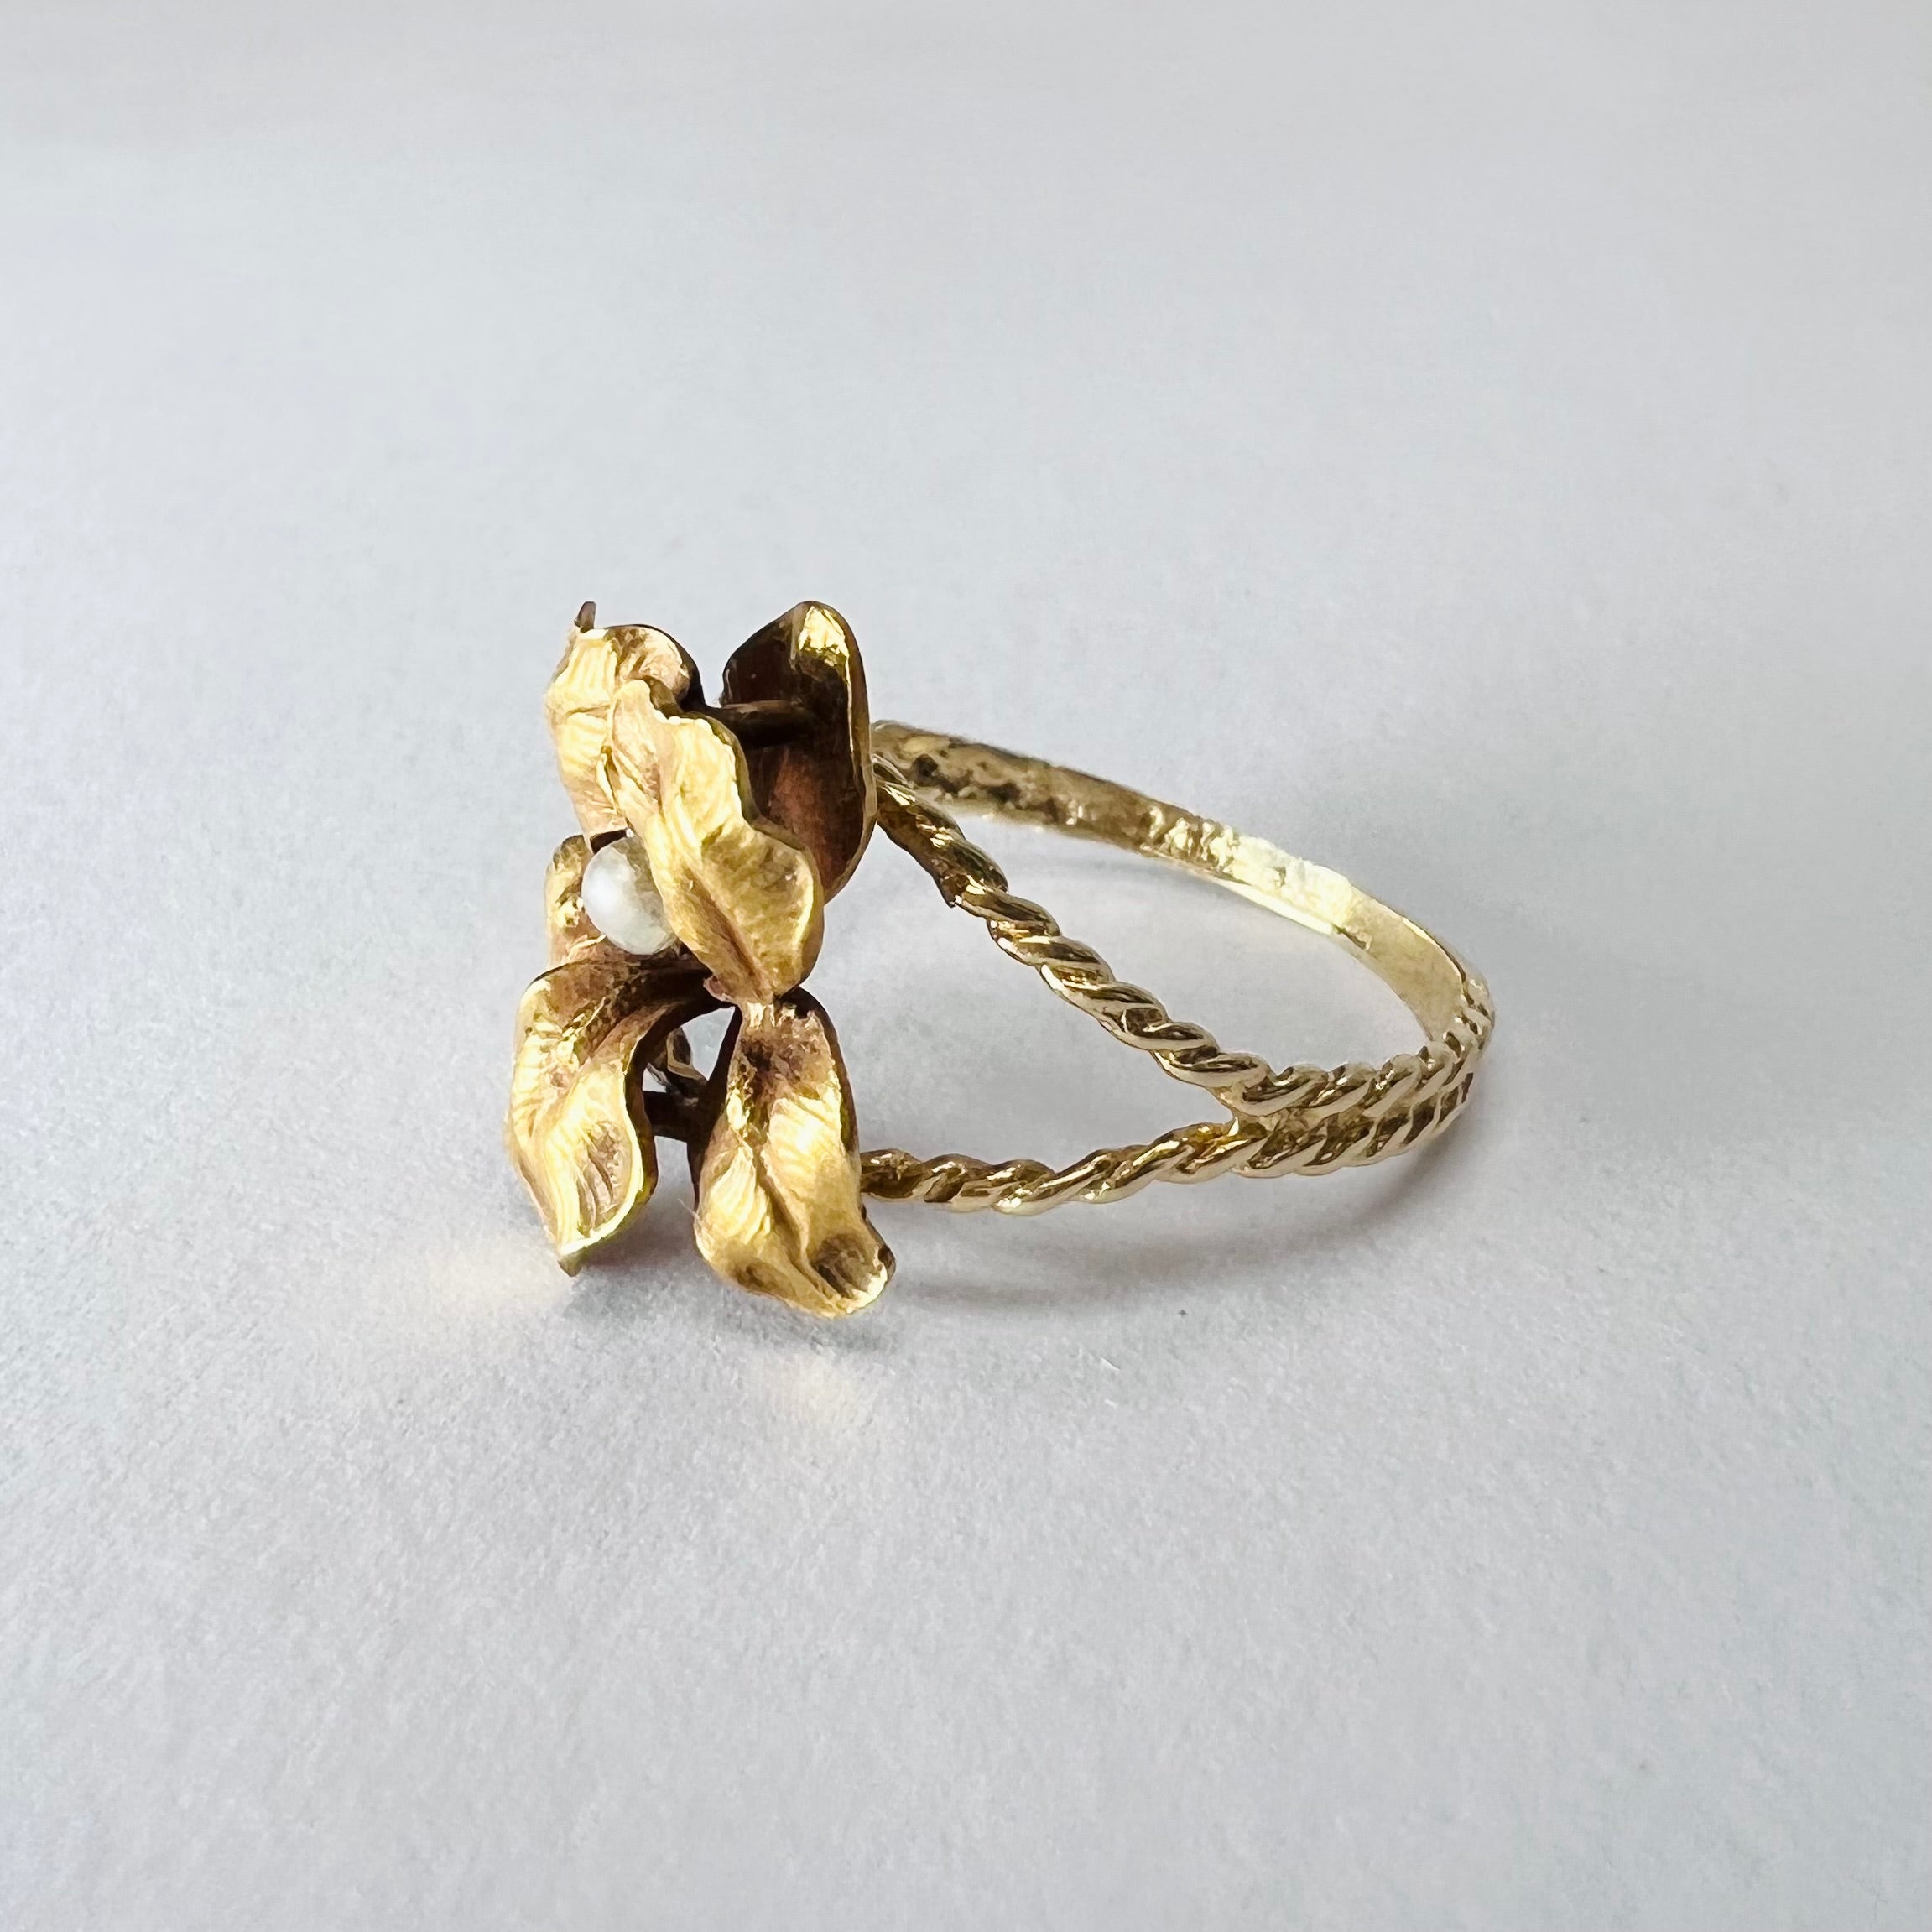 Solid 14K Yellow Gold Pearl and Golden Leaf Twisted Ring Band Size 5.75